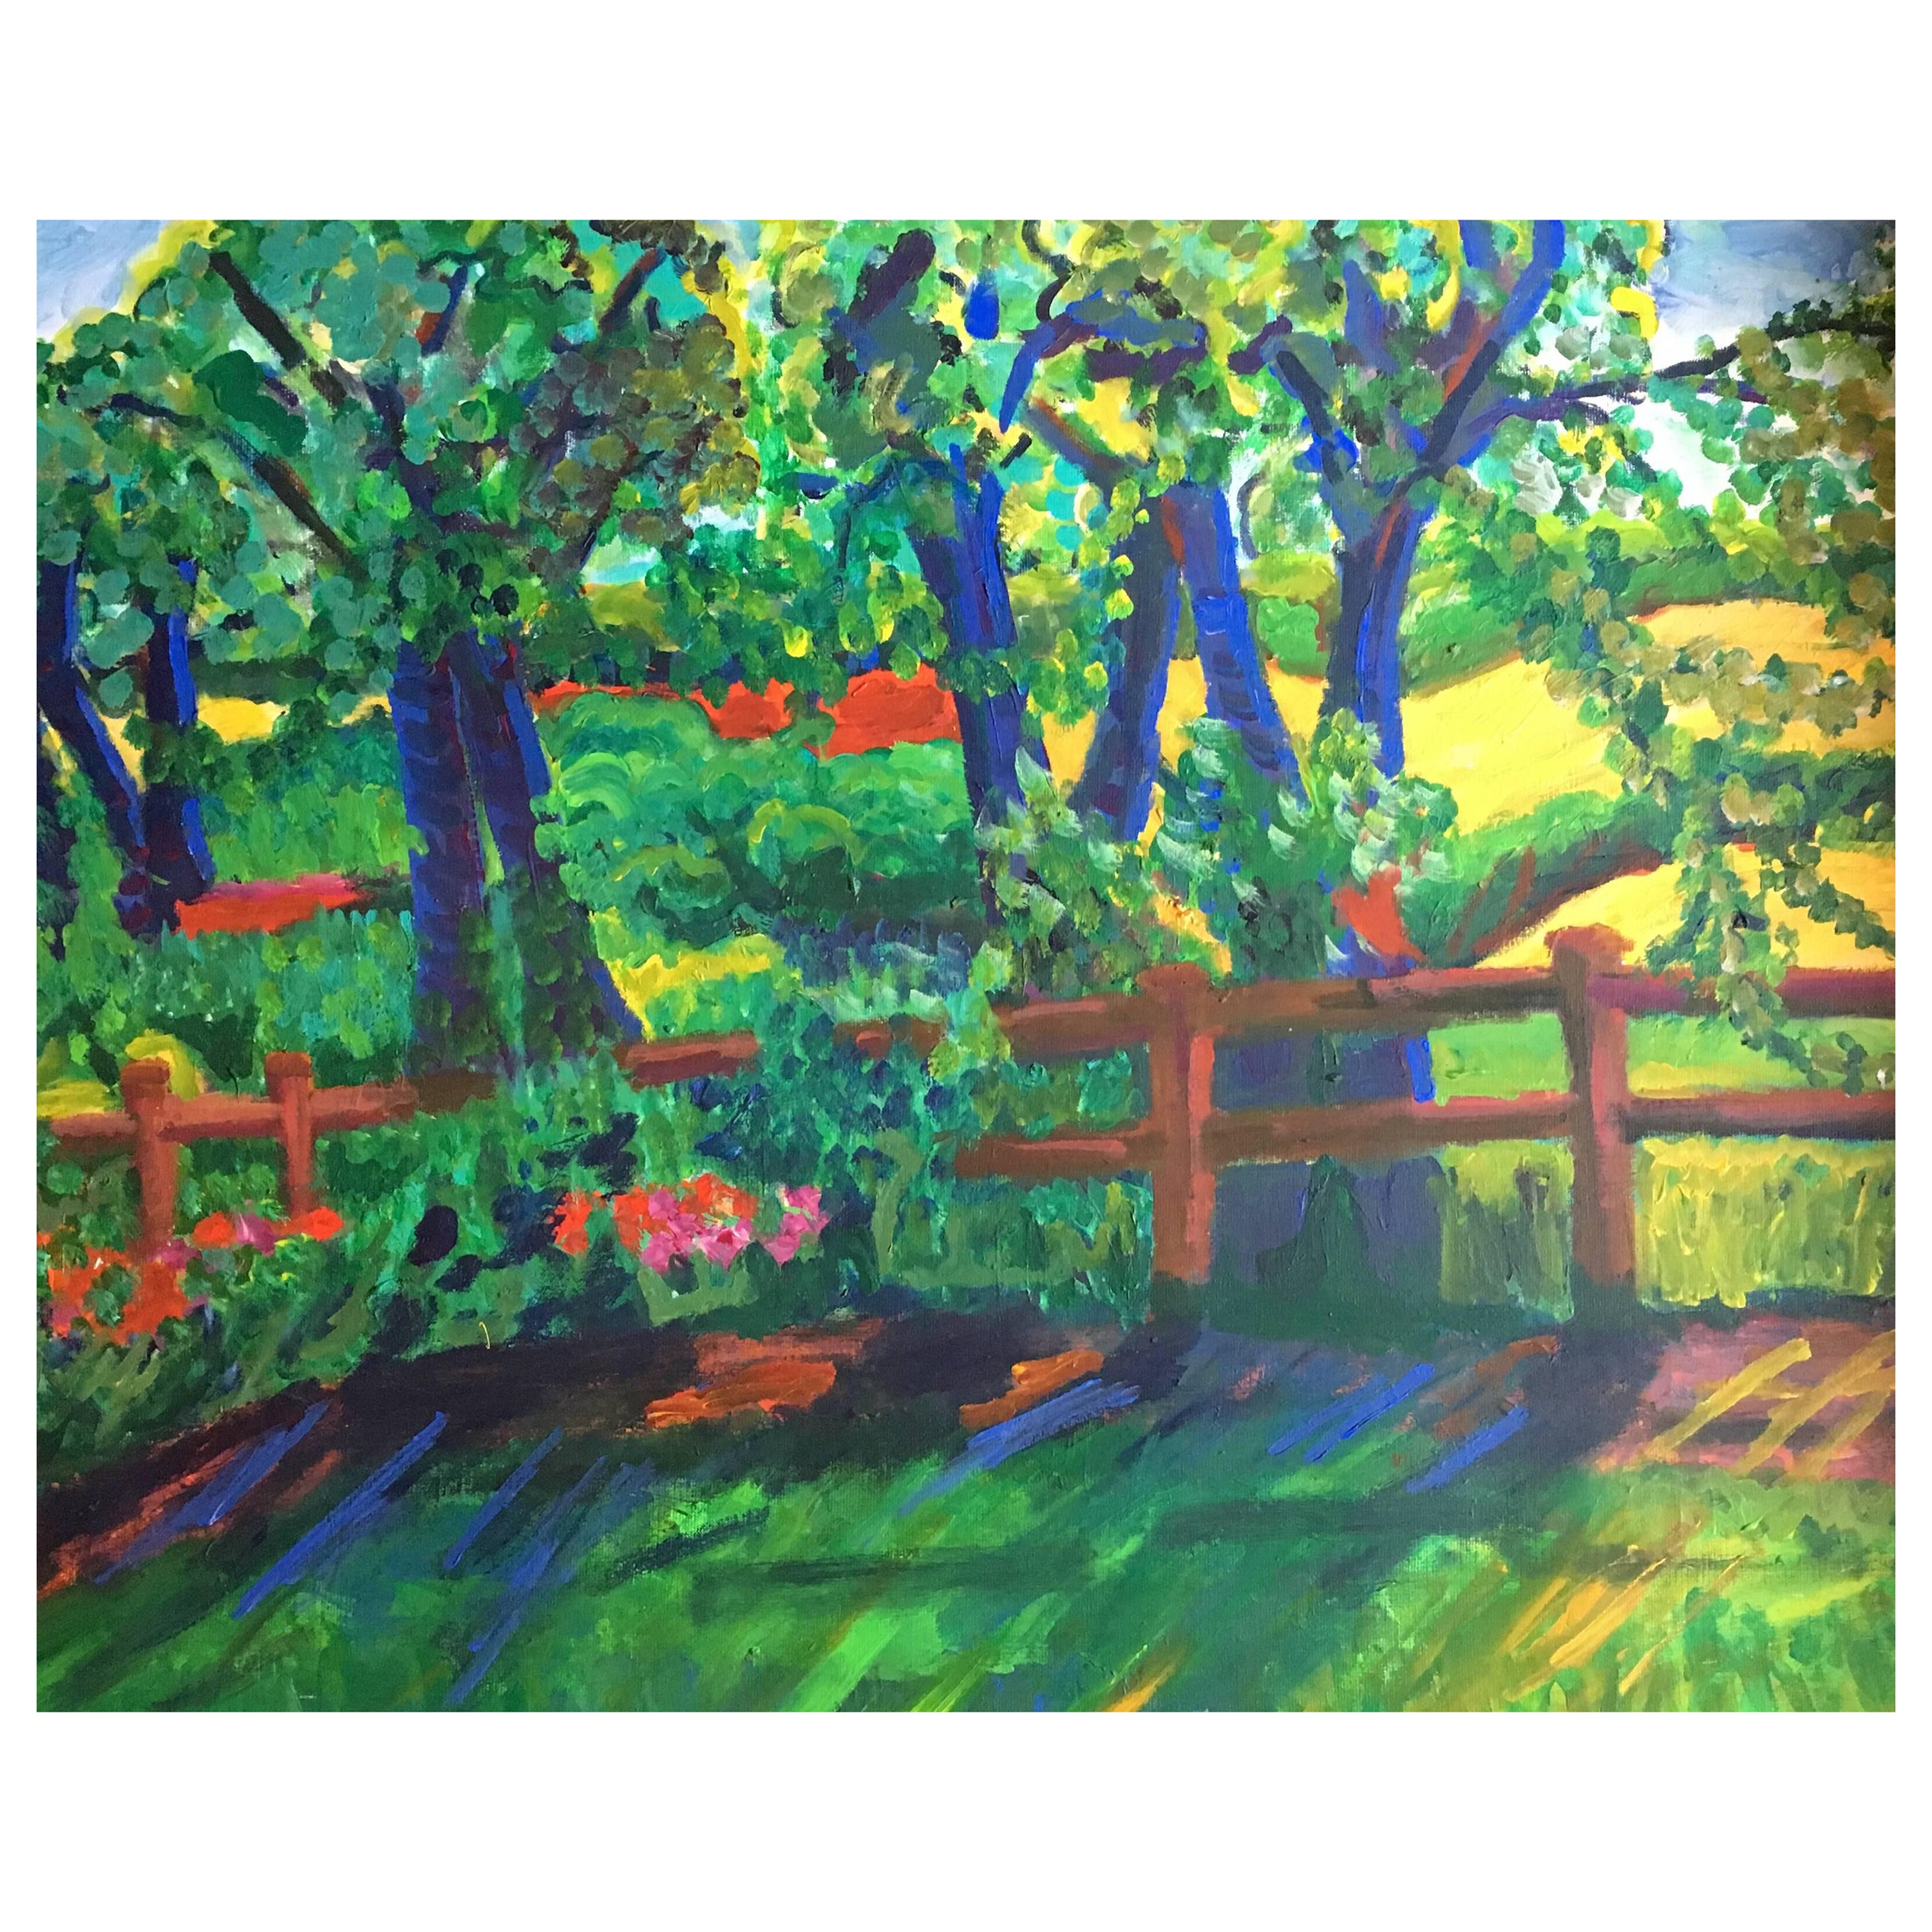 Huge British Oil Painting Impressionist Sunlit Country Lane Green & Gold Colors